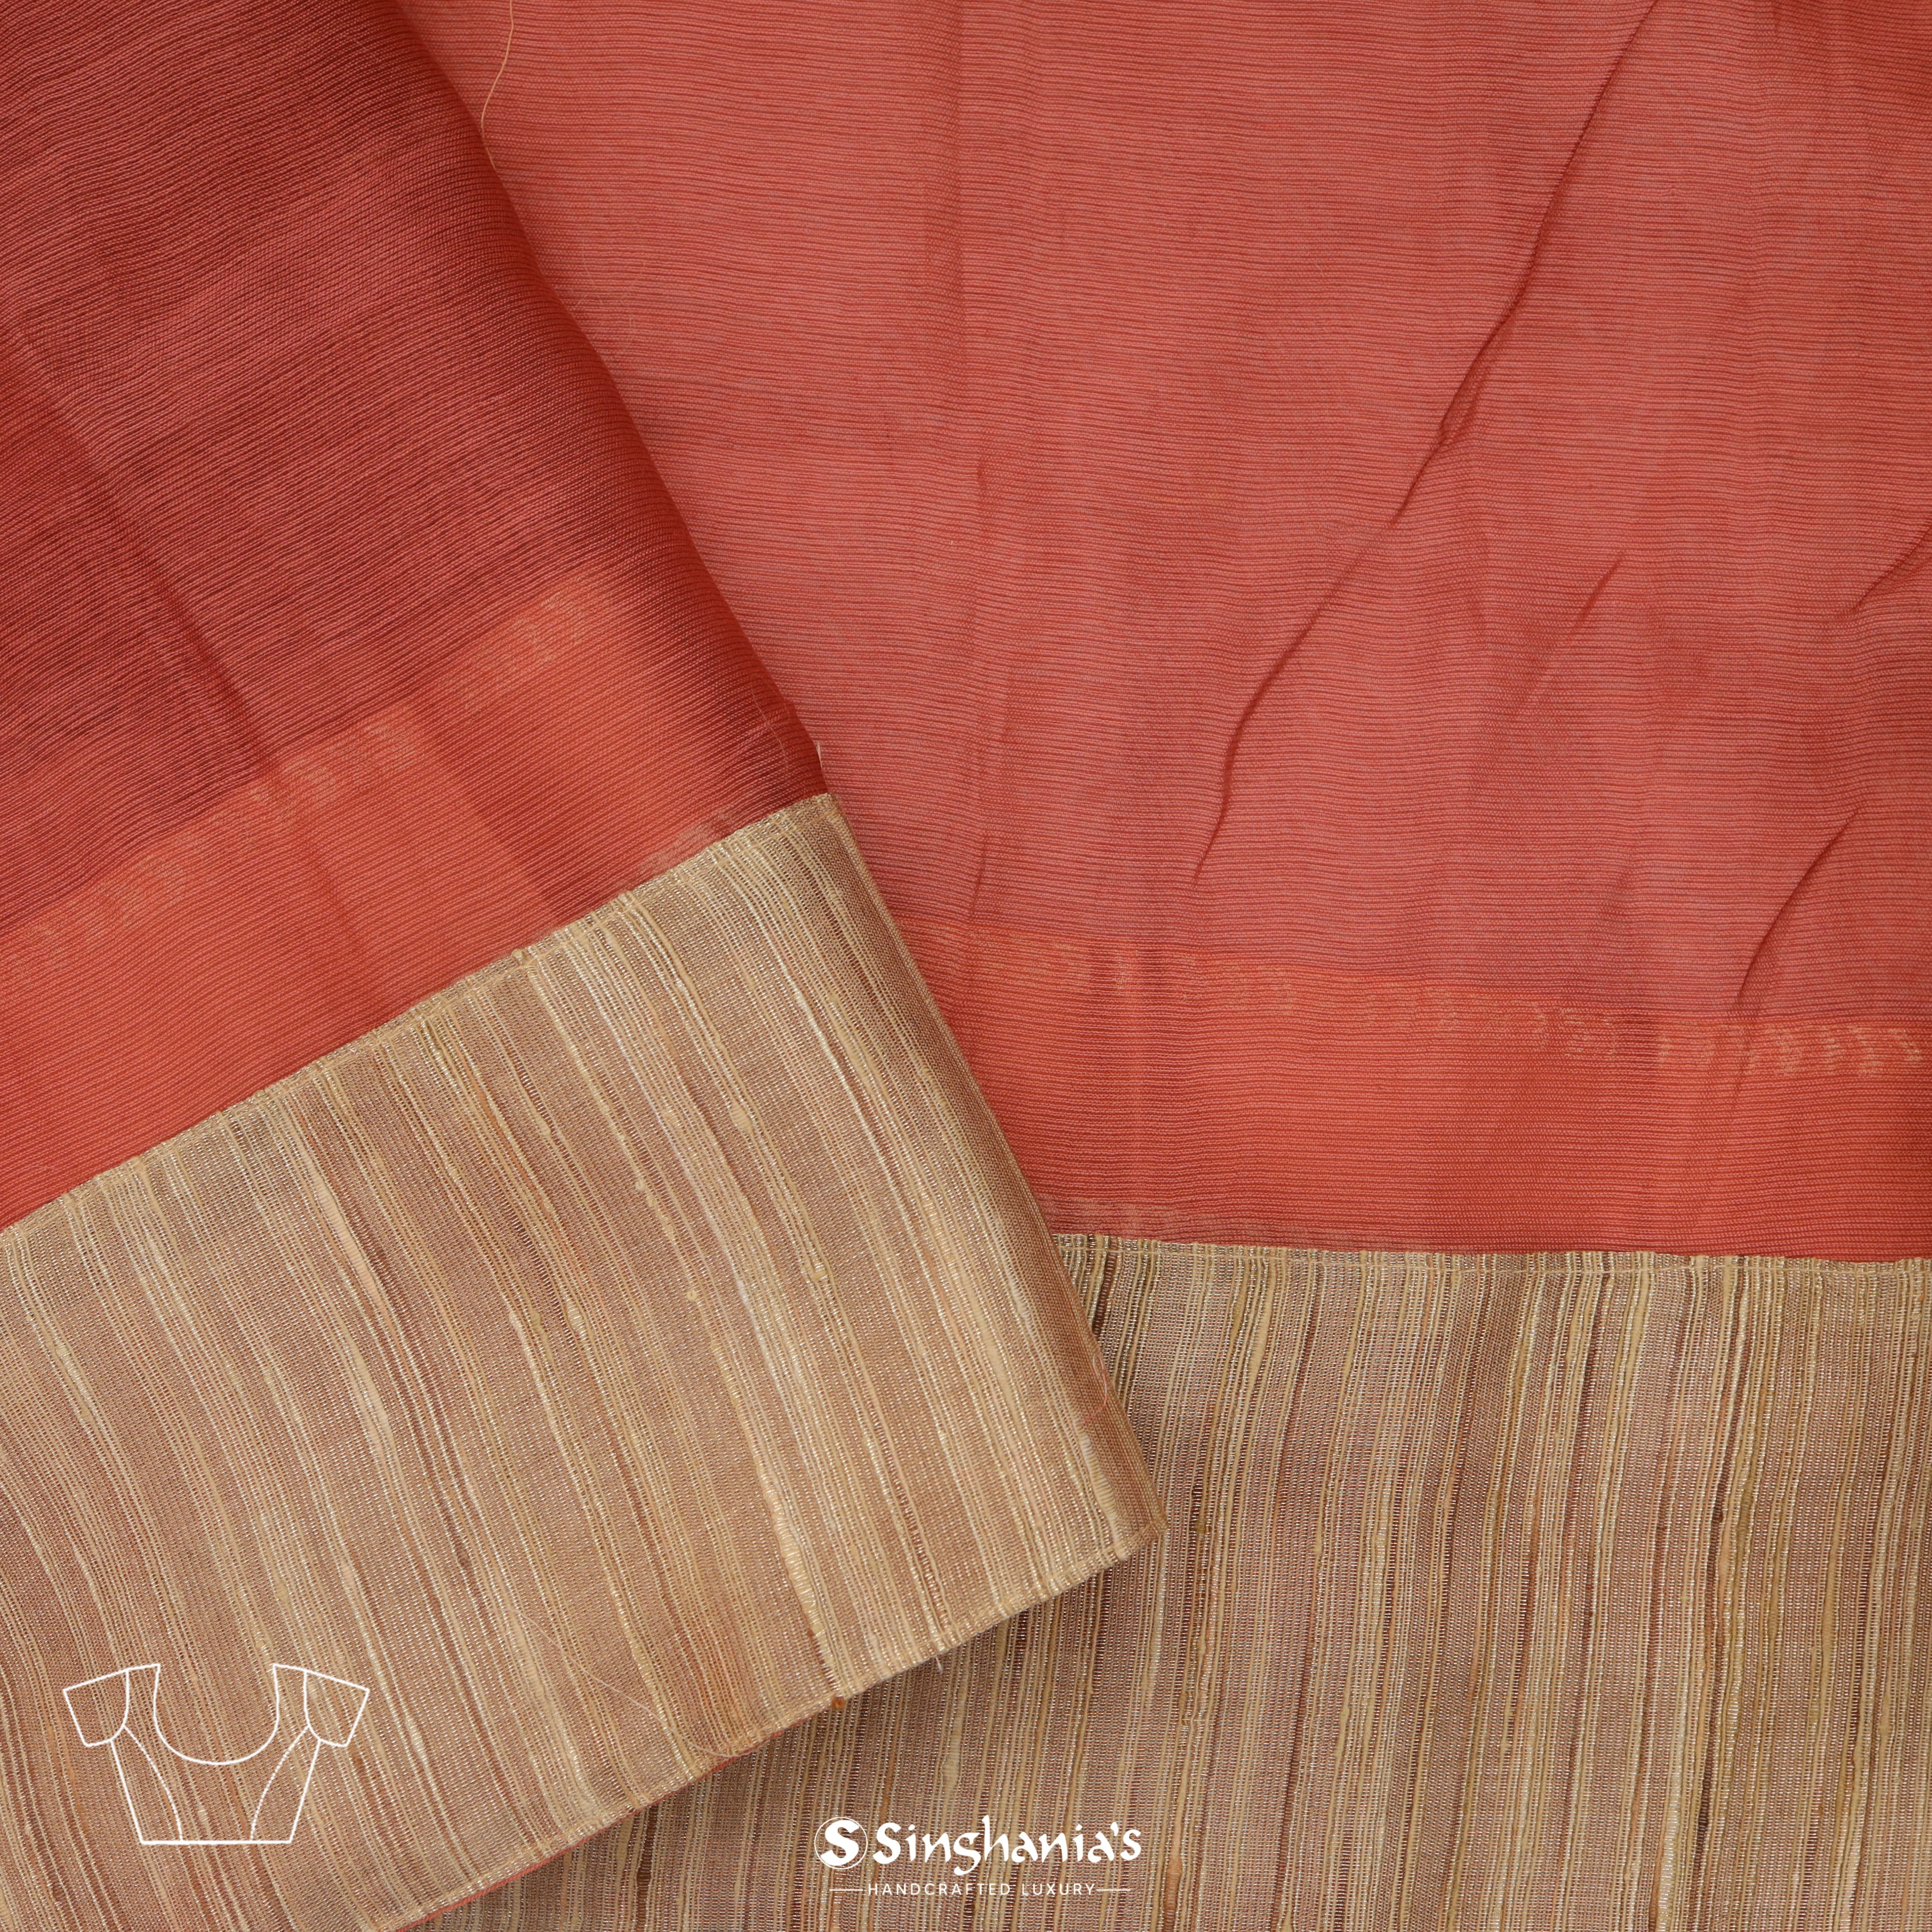 Burnt Red Maheshwari Embroidery Saree With Tiny Floral Buttis